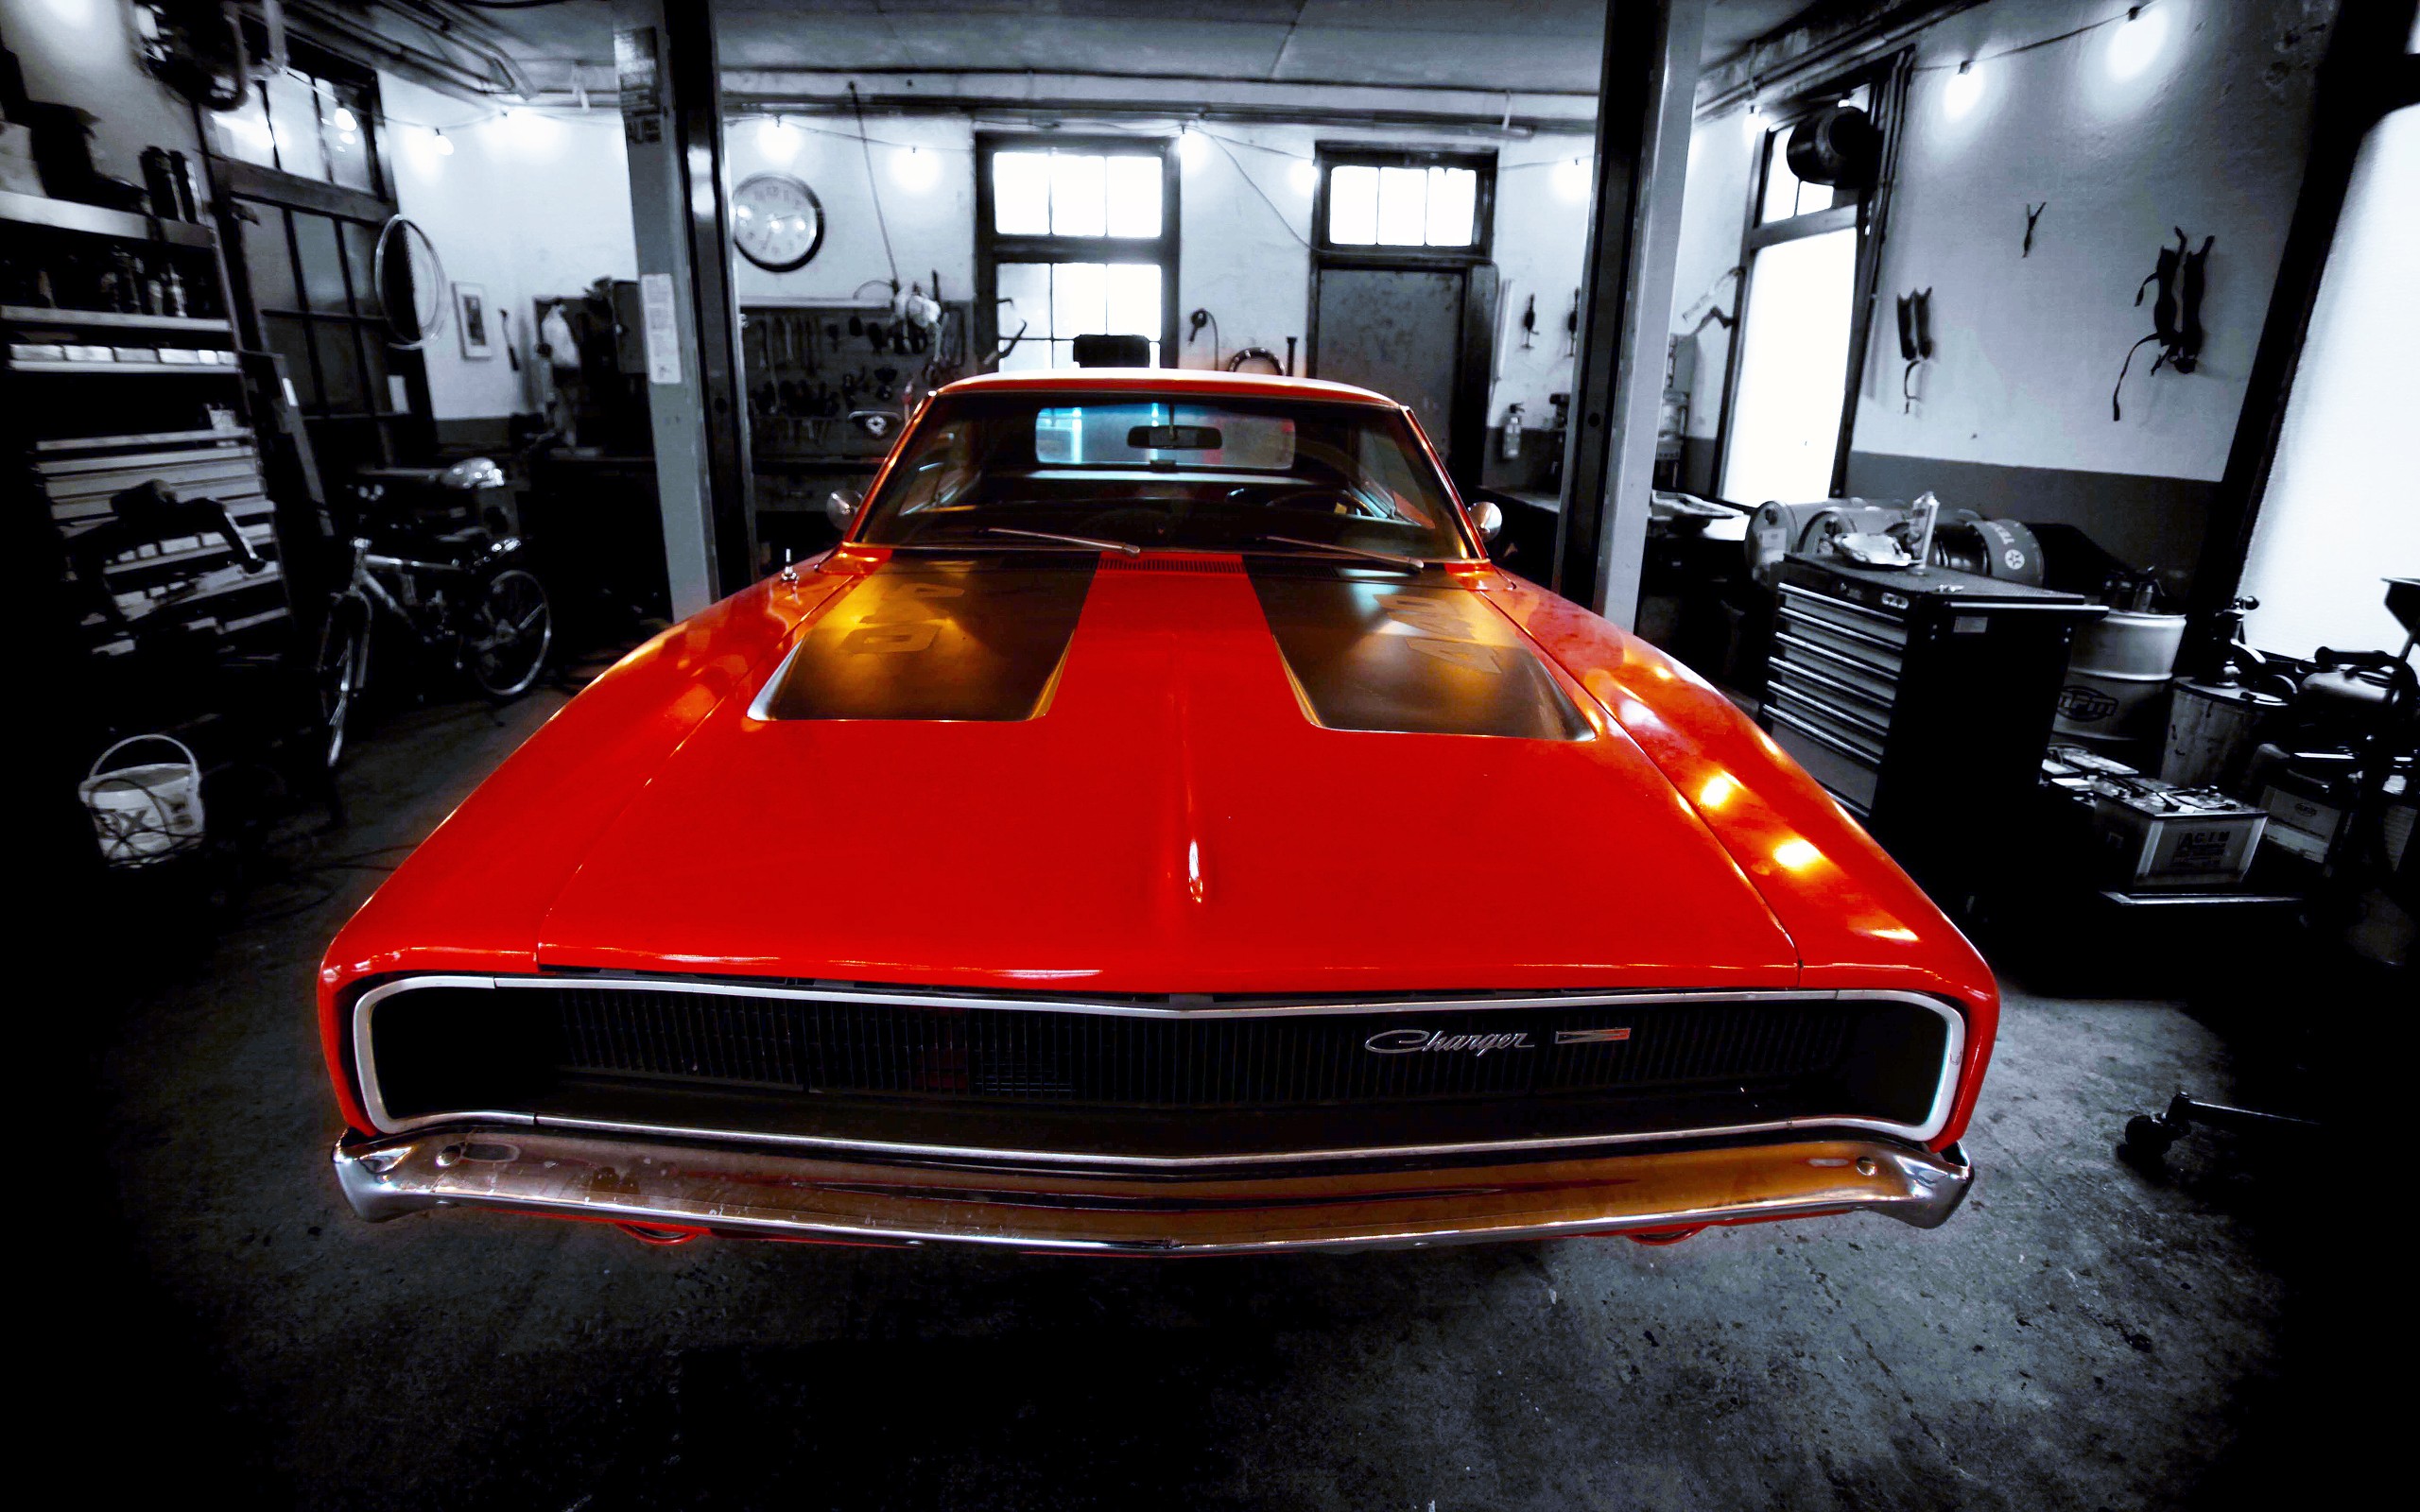 General 2560x1600 Dodge Dodge Charger car muscle cars American cars classic car garage